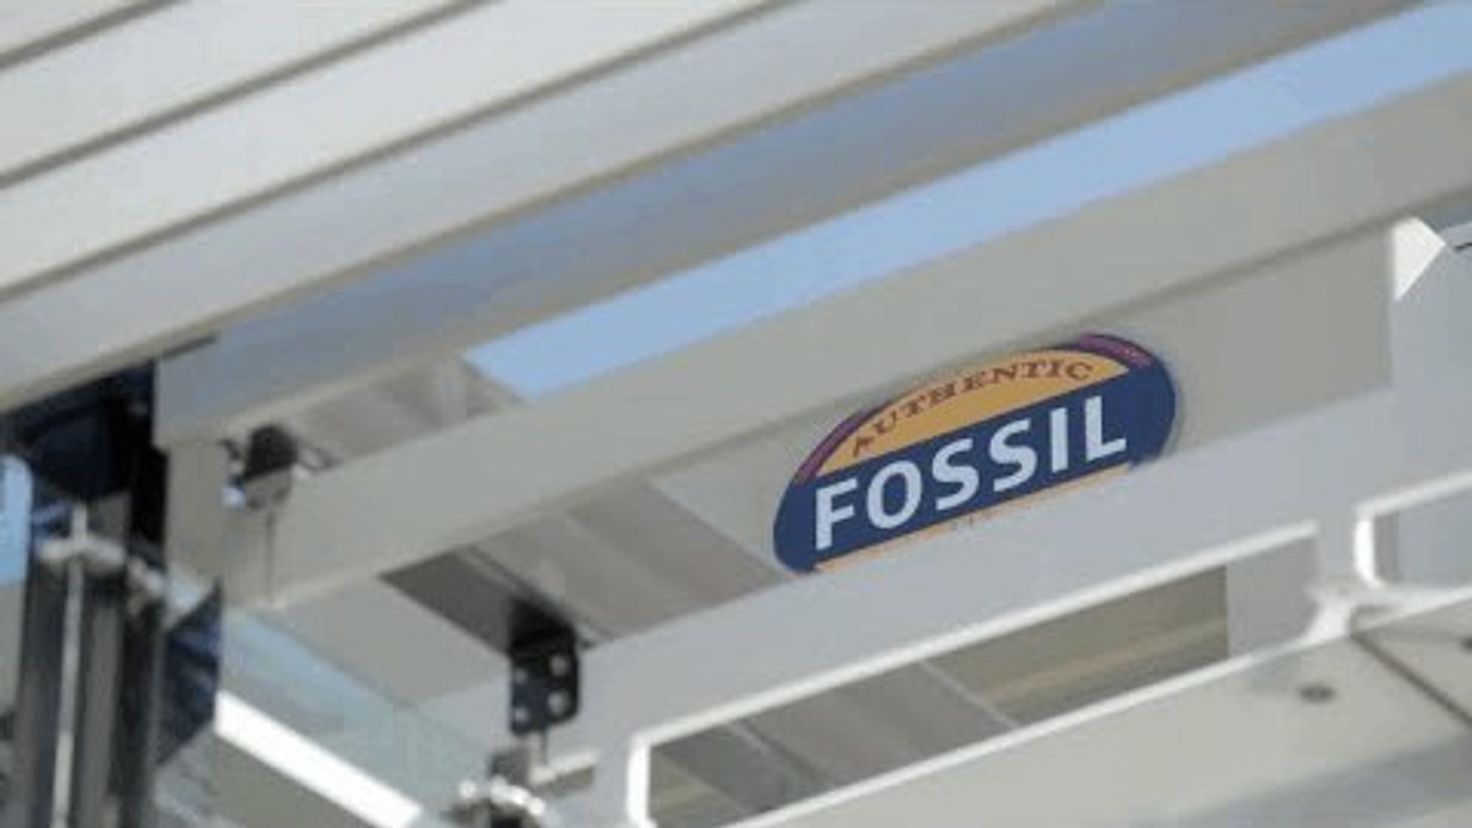 Hear from Fossil about how they use Content Anytime to engage their people